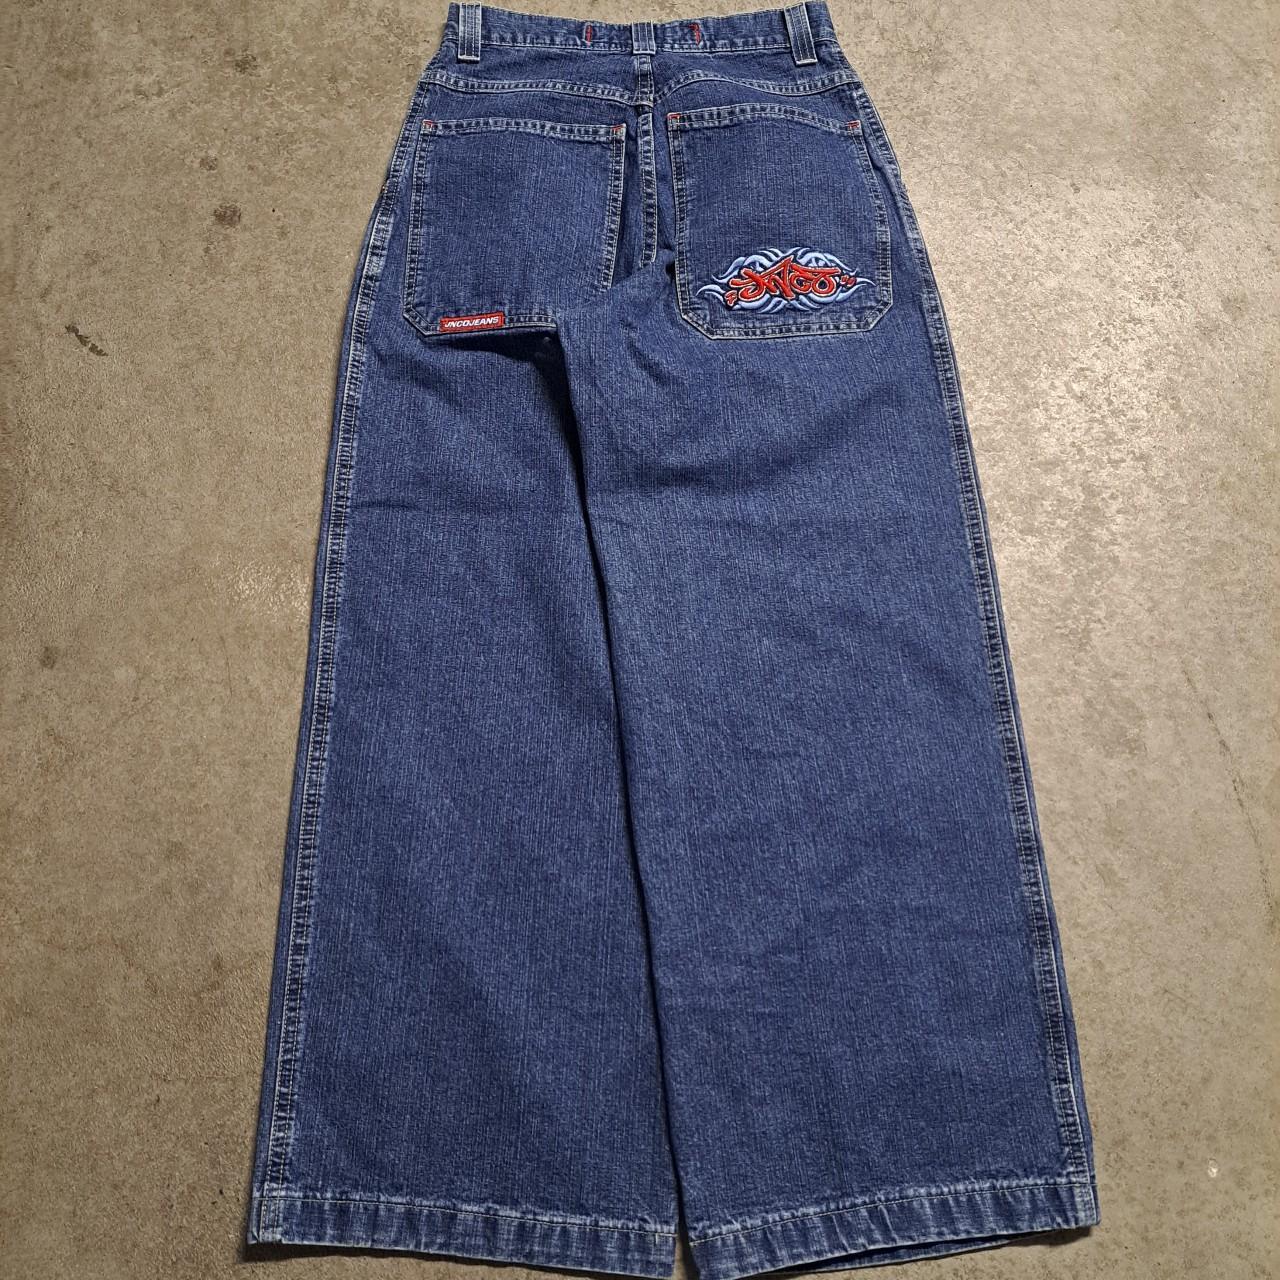 SUPER SICK AND RARE JNCO TRIBAL STYLE EMBROIDERED... - Depop